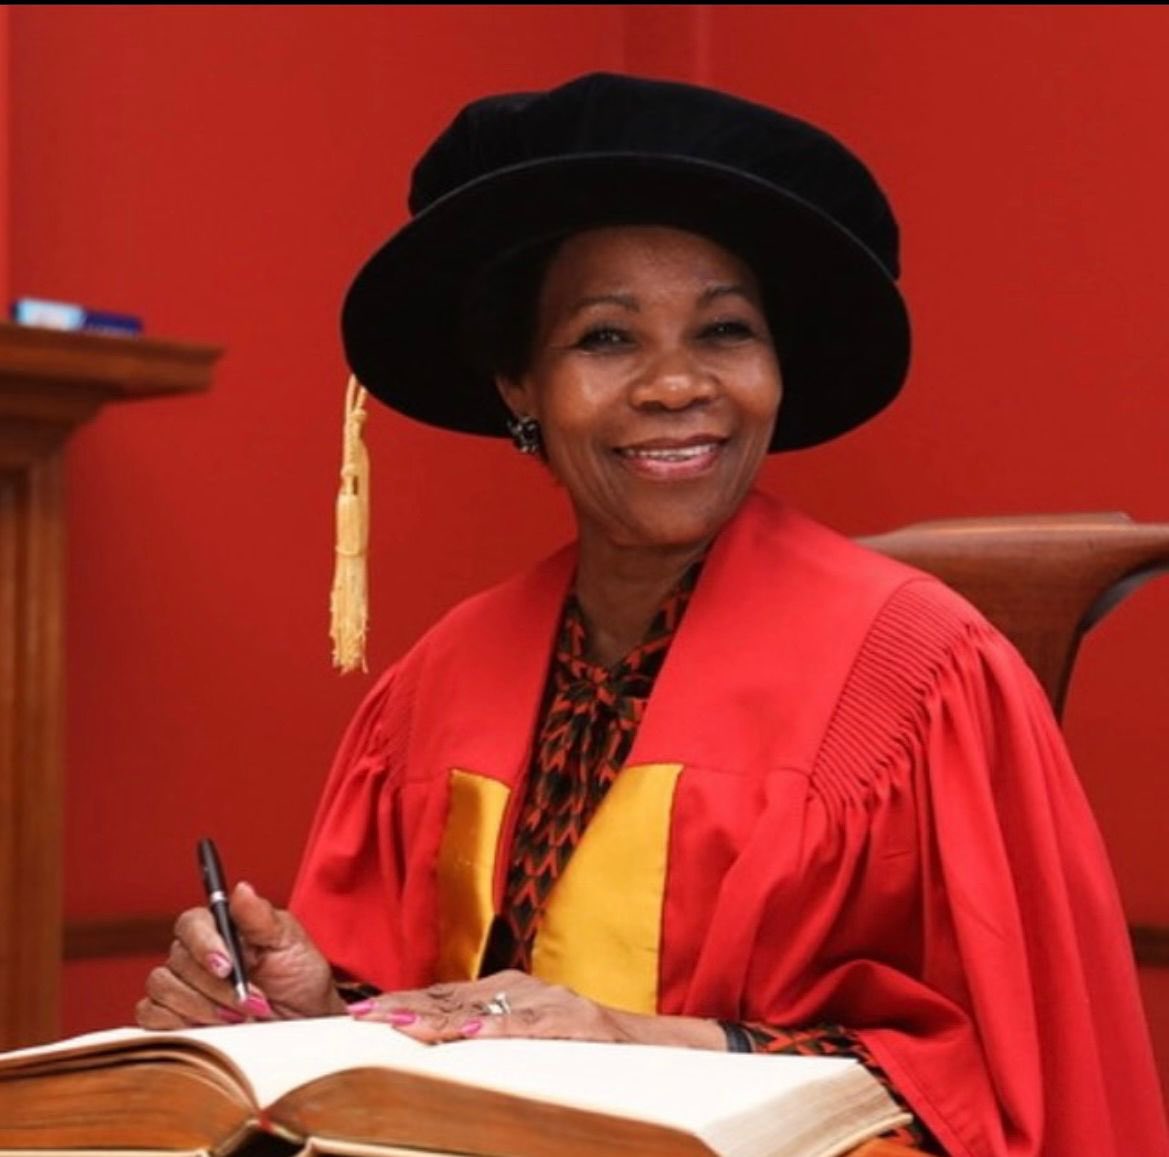 The first woman appointed to South Africa’s Constitutional Court. Her contributions to justice, equality, and human rights have left an indelible mark on South Africa and beyond. 

She broke barriers and paved the way for so many of us who follow in her footsteps.